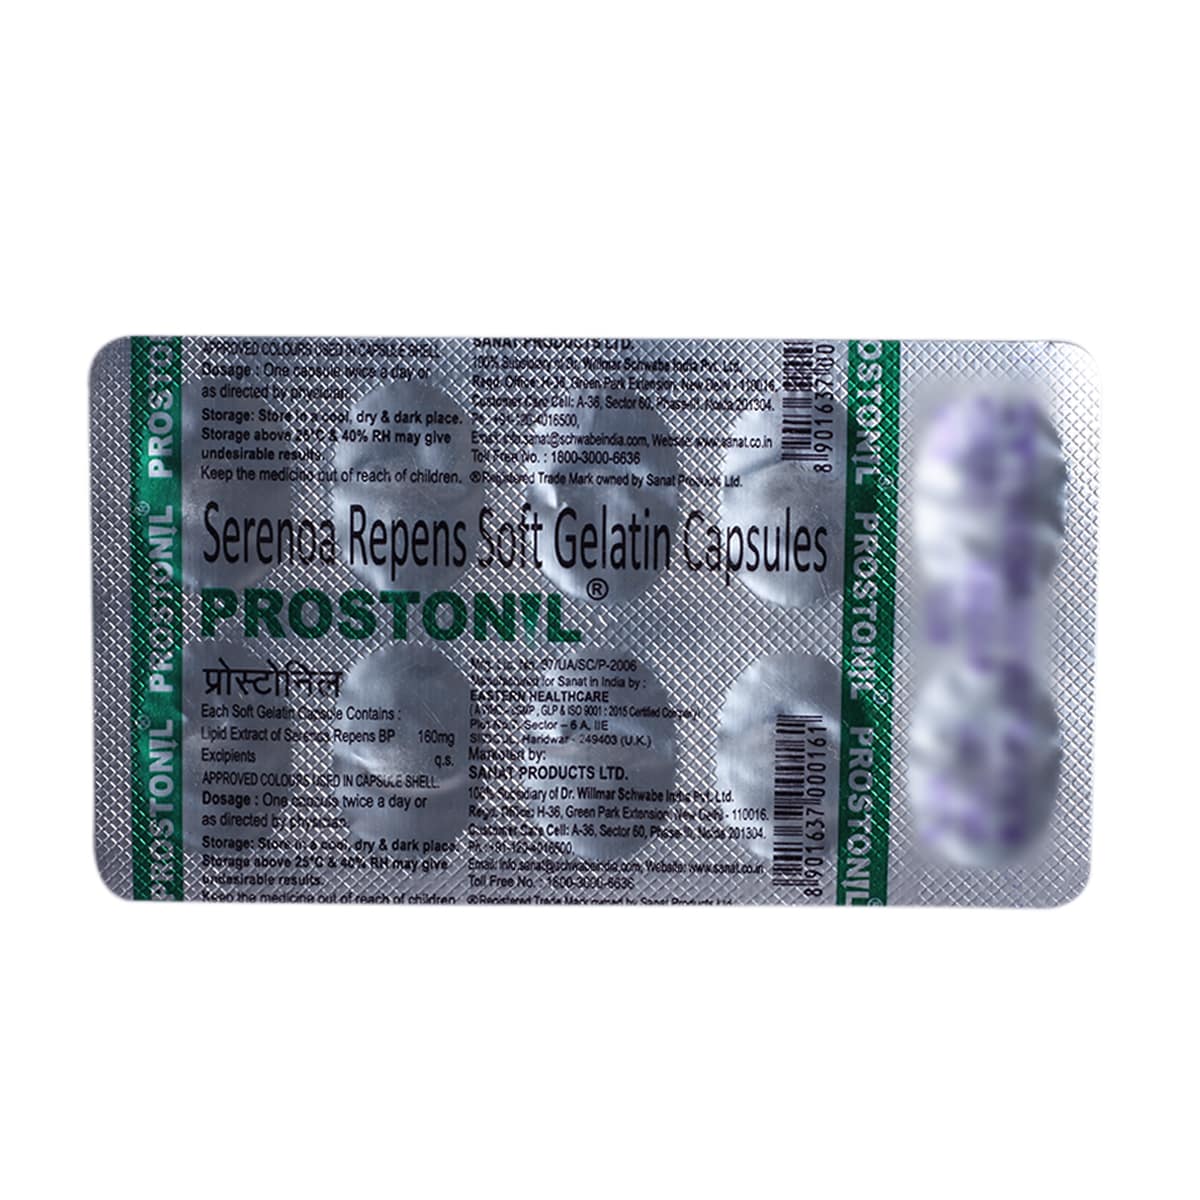 PROSTONIL CAPSULE Price, Uses, Side Effects, Composition